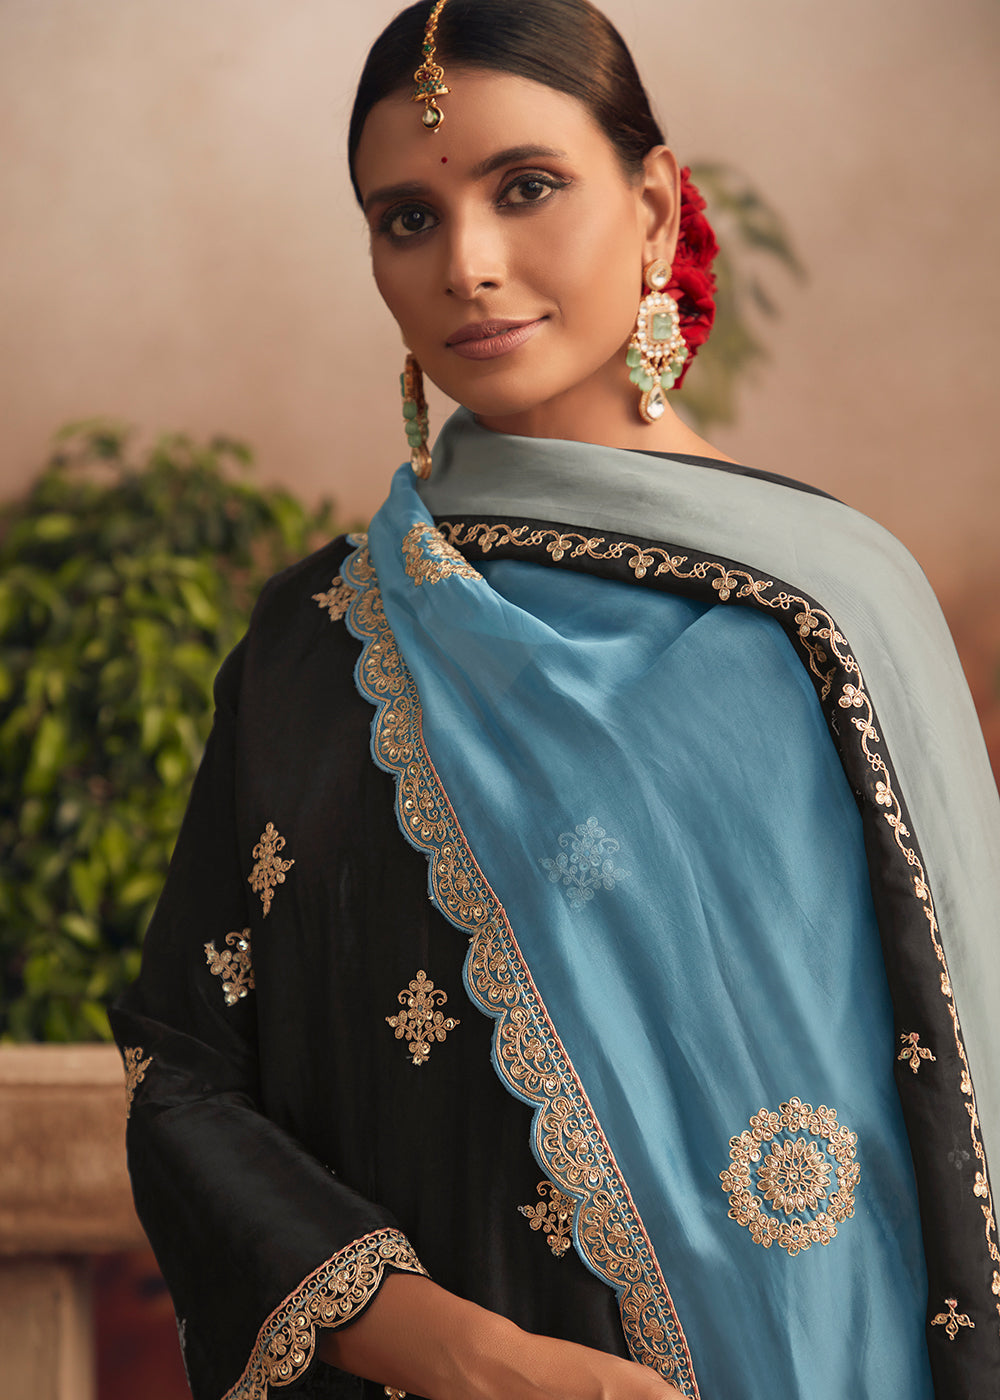 Buy Now Silk Modale Jet Black Embroidered Festive Salwar Suit Online in USA, UK, Canada, Germany, Australia & Worldwide at Empress Clothing. 